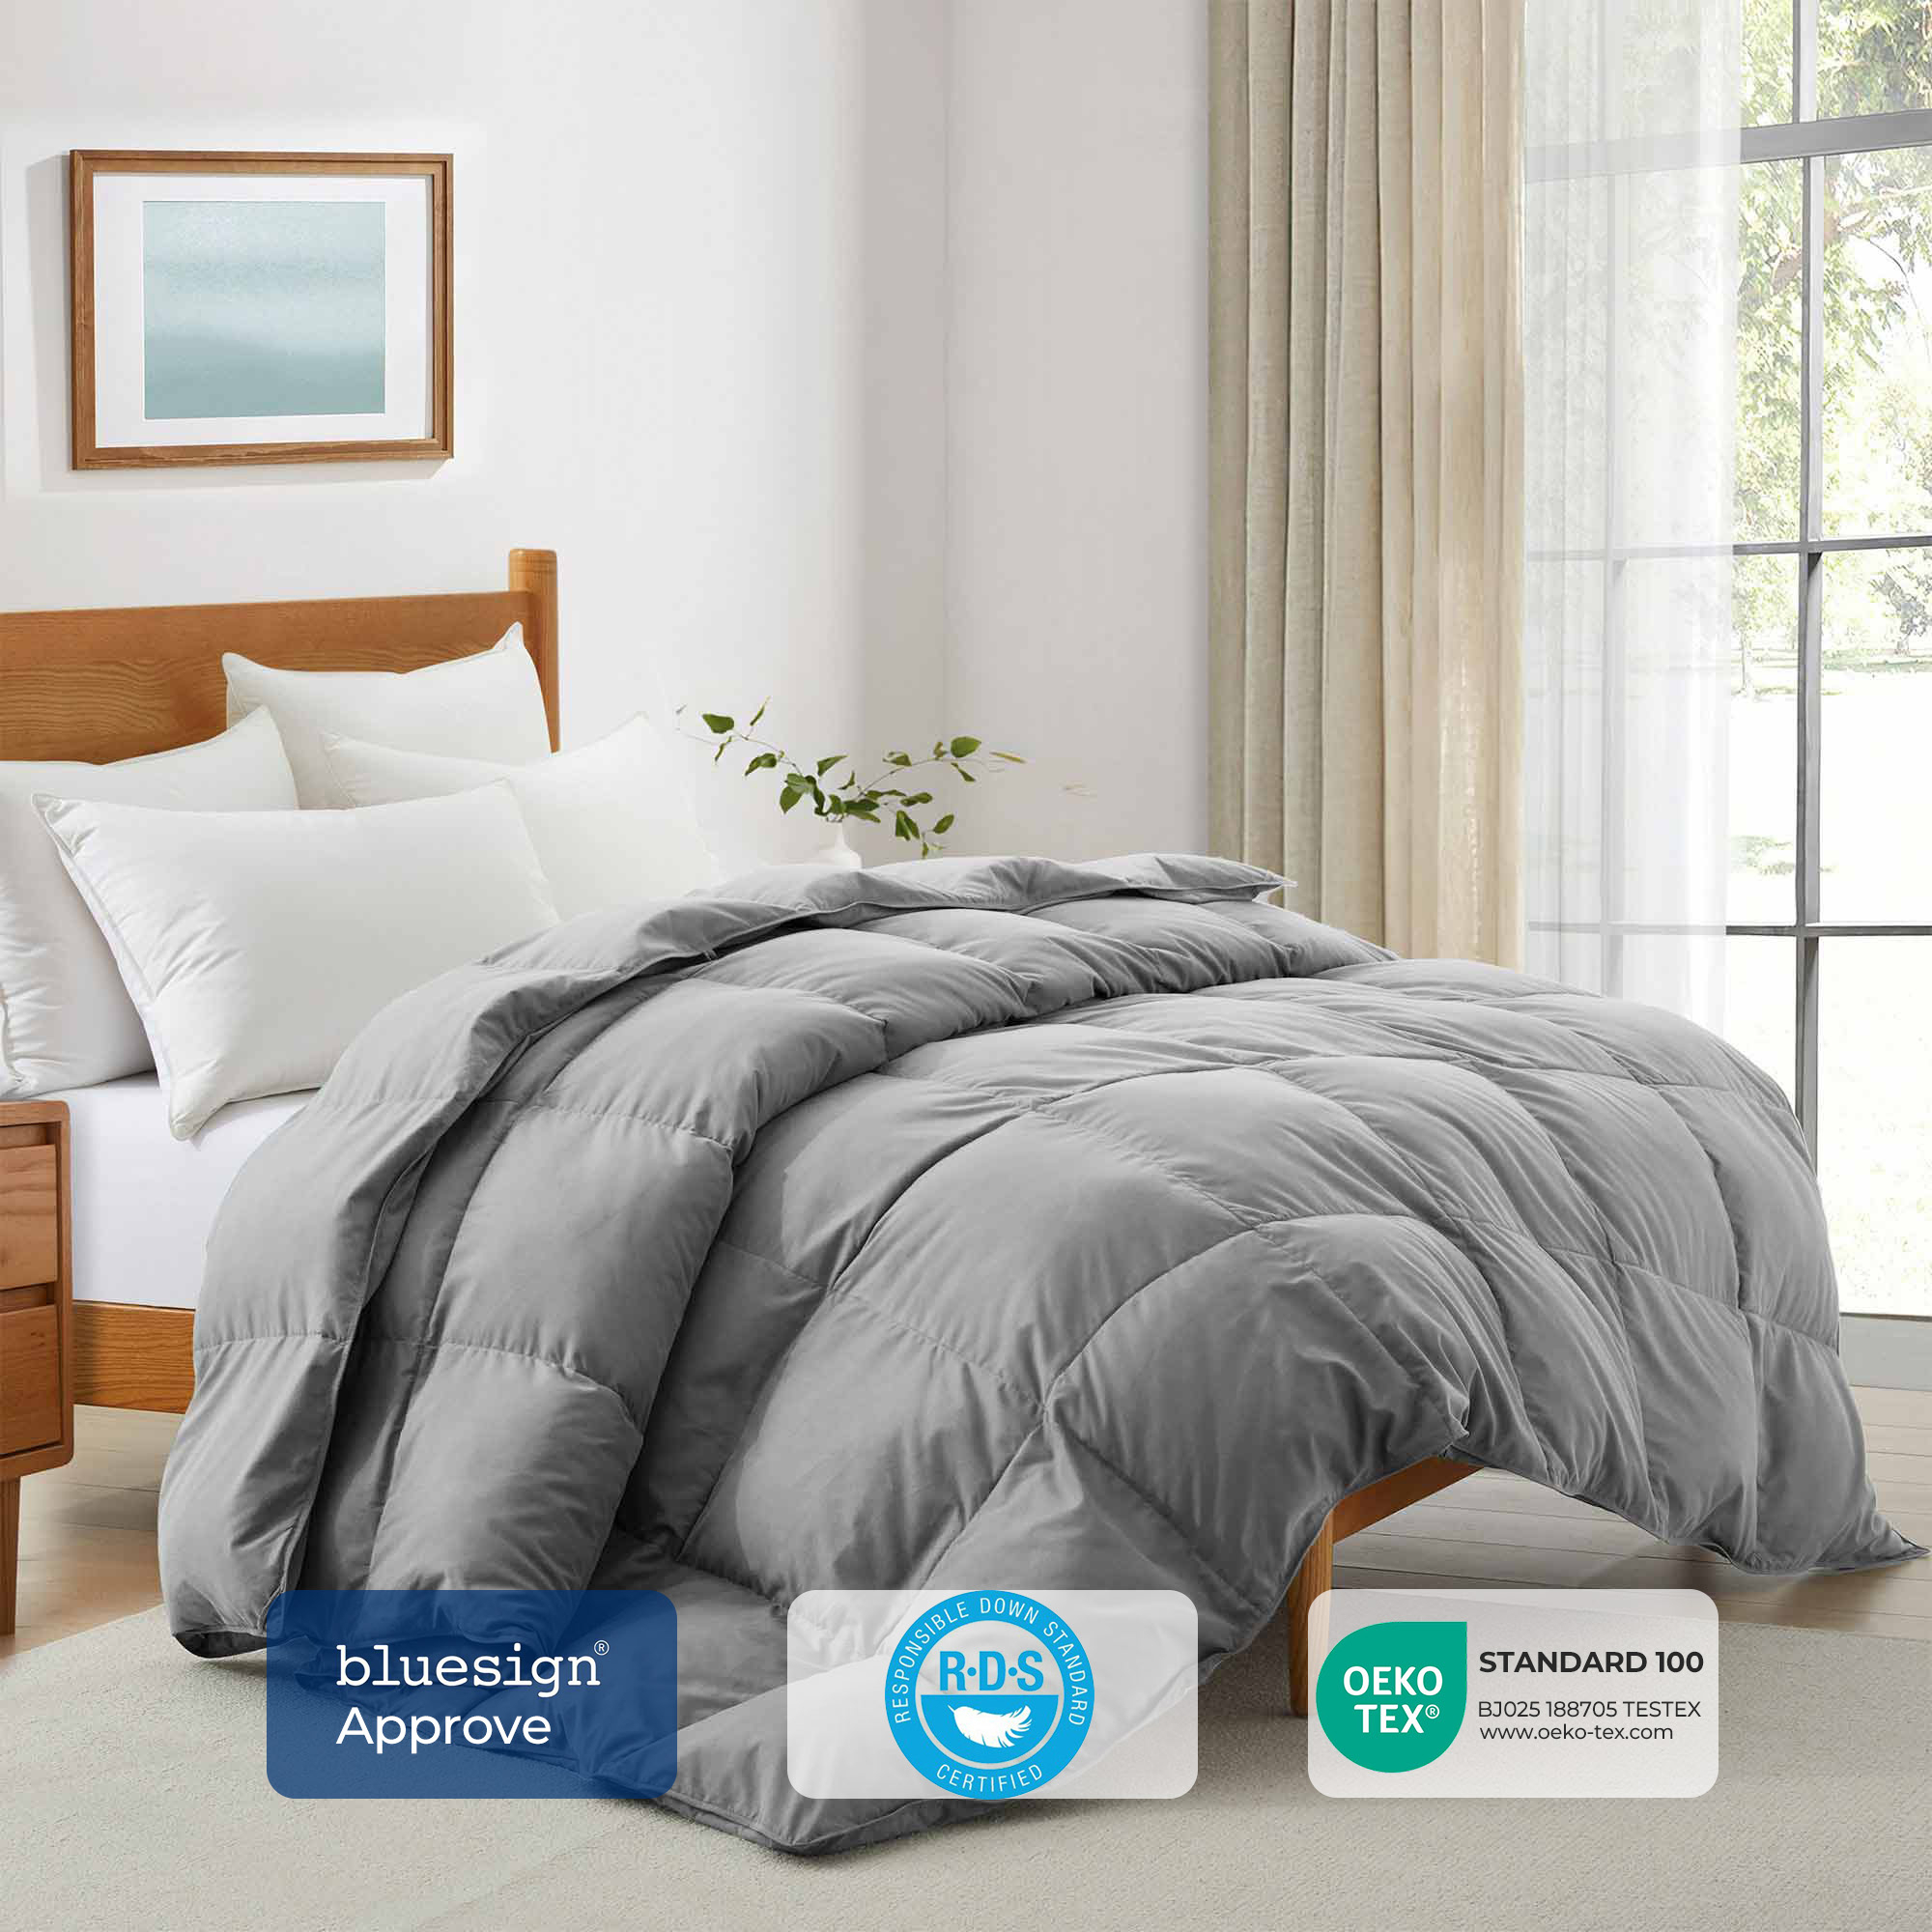 All Seasons Goose Down Feather Comforter Ultra Soft Comforter With Peach Skin Fabric - Nimbus Cloud, King-104*88